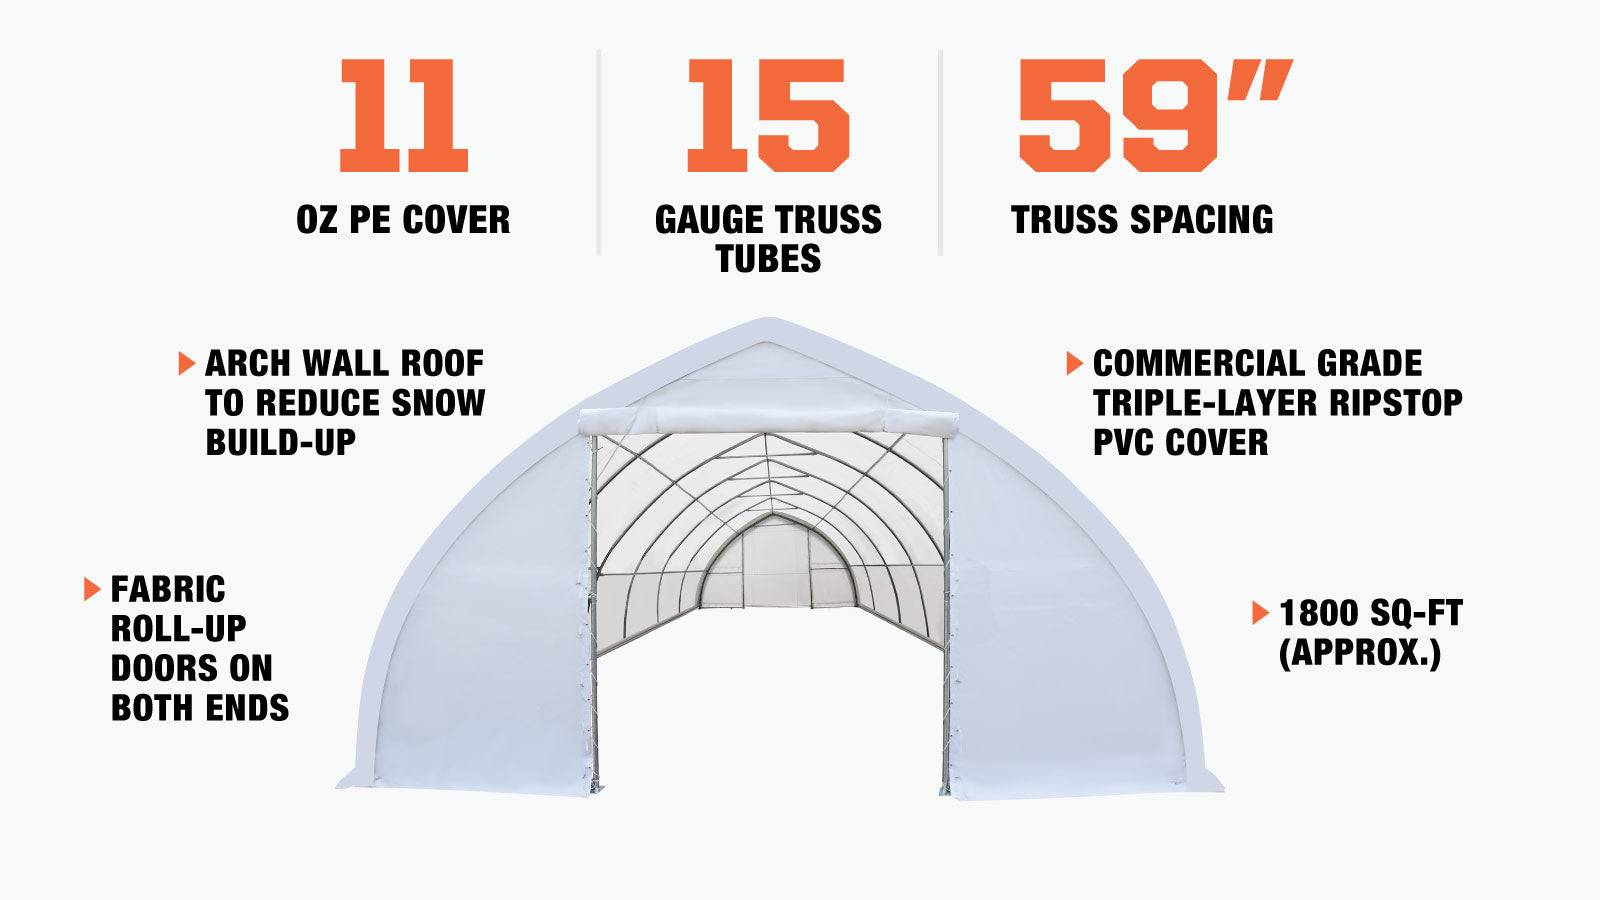 TMG Industrial 30' x 60' Peak Ceiling Storage Shelter with Heavy Duty 11 oz PE Cover & Drive Through Doors, TMG-ST3060E(Previously ST3060)-description-image